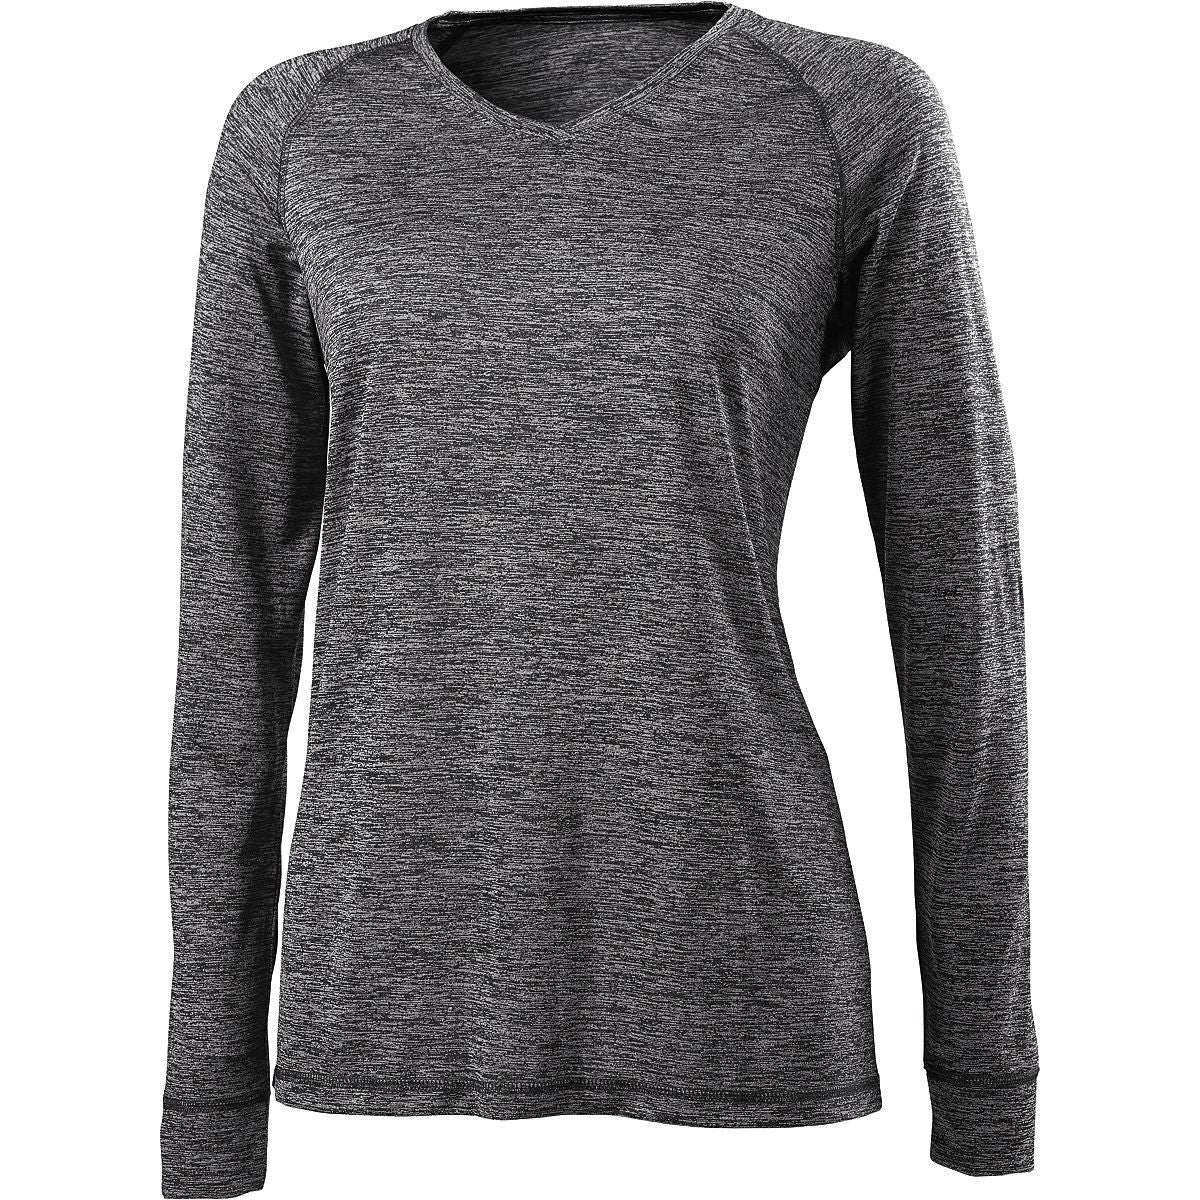 Holloway Ladies Electrify 2.0 V-Neck Long Sleeve Shirt in Black Heather  -Part of the Ladies, Holloway, Shirts product lines at KanaleyCreations.com